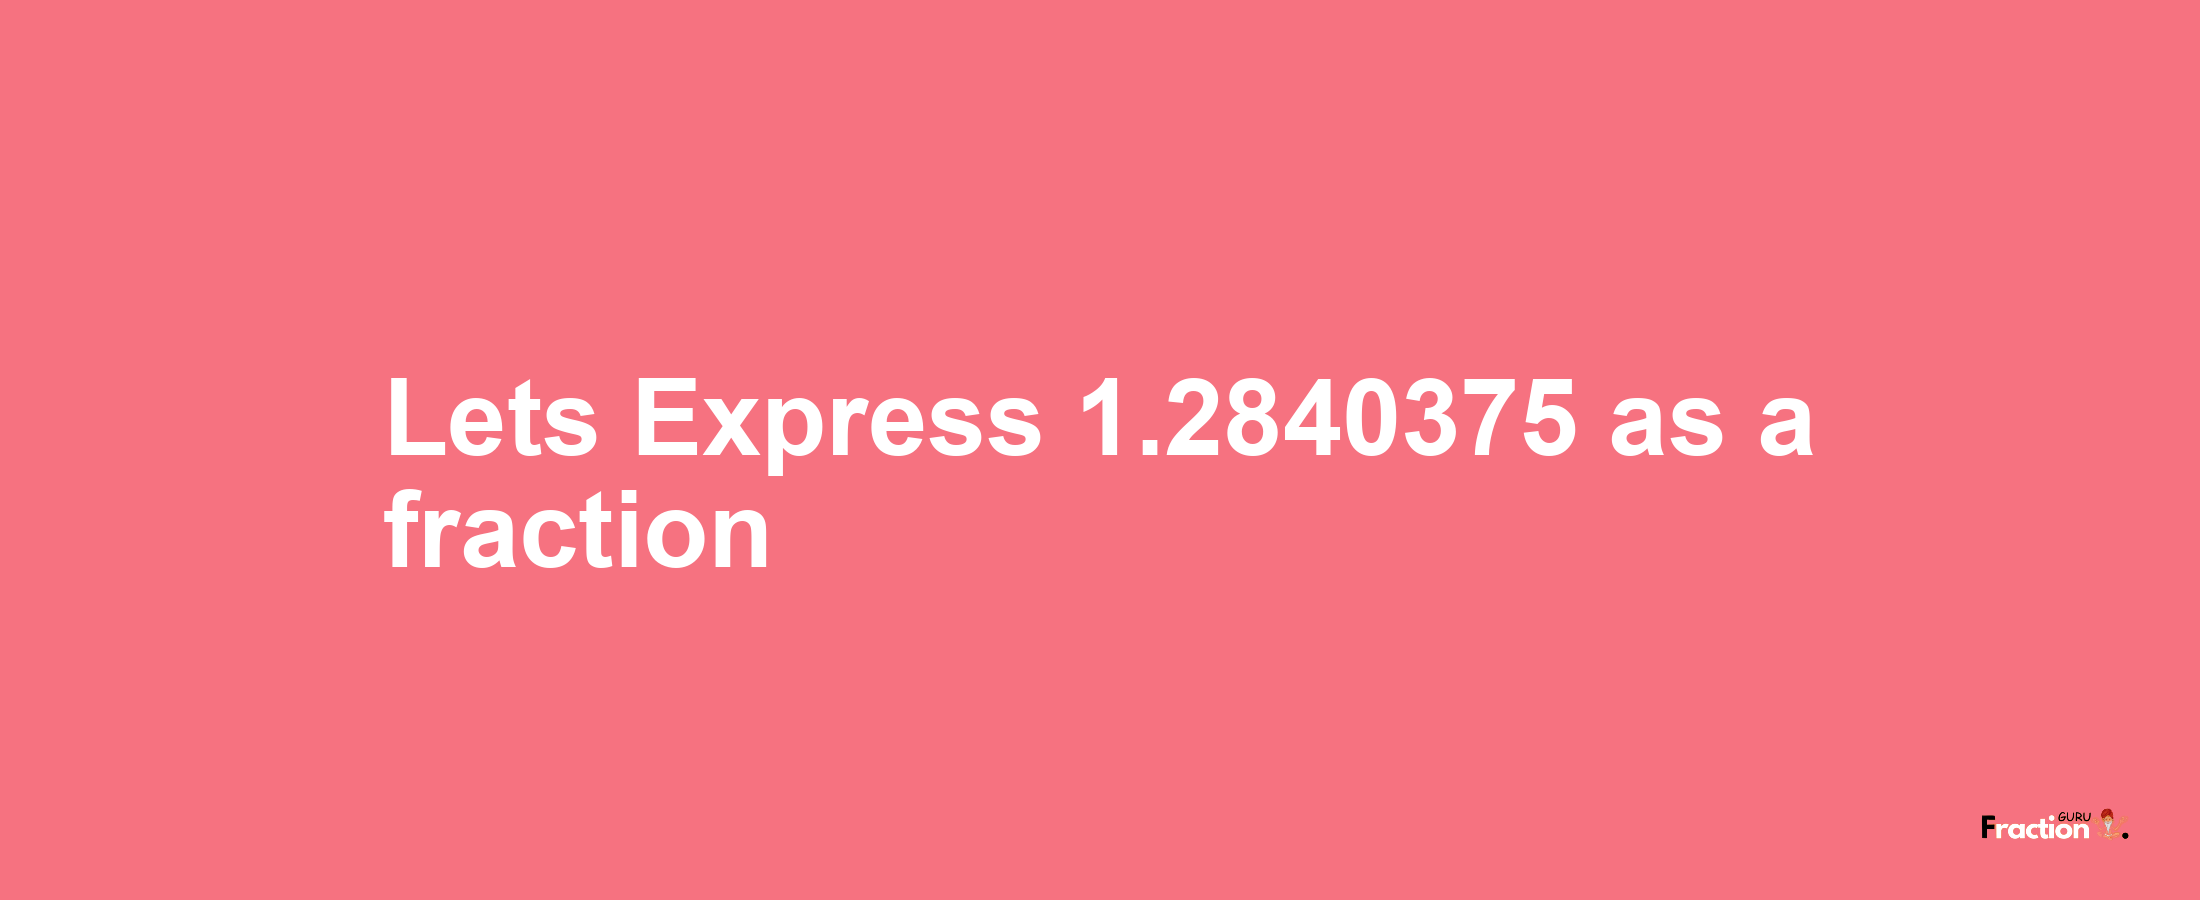 Lets Express 1.2840375 as afraction